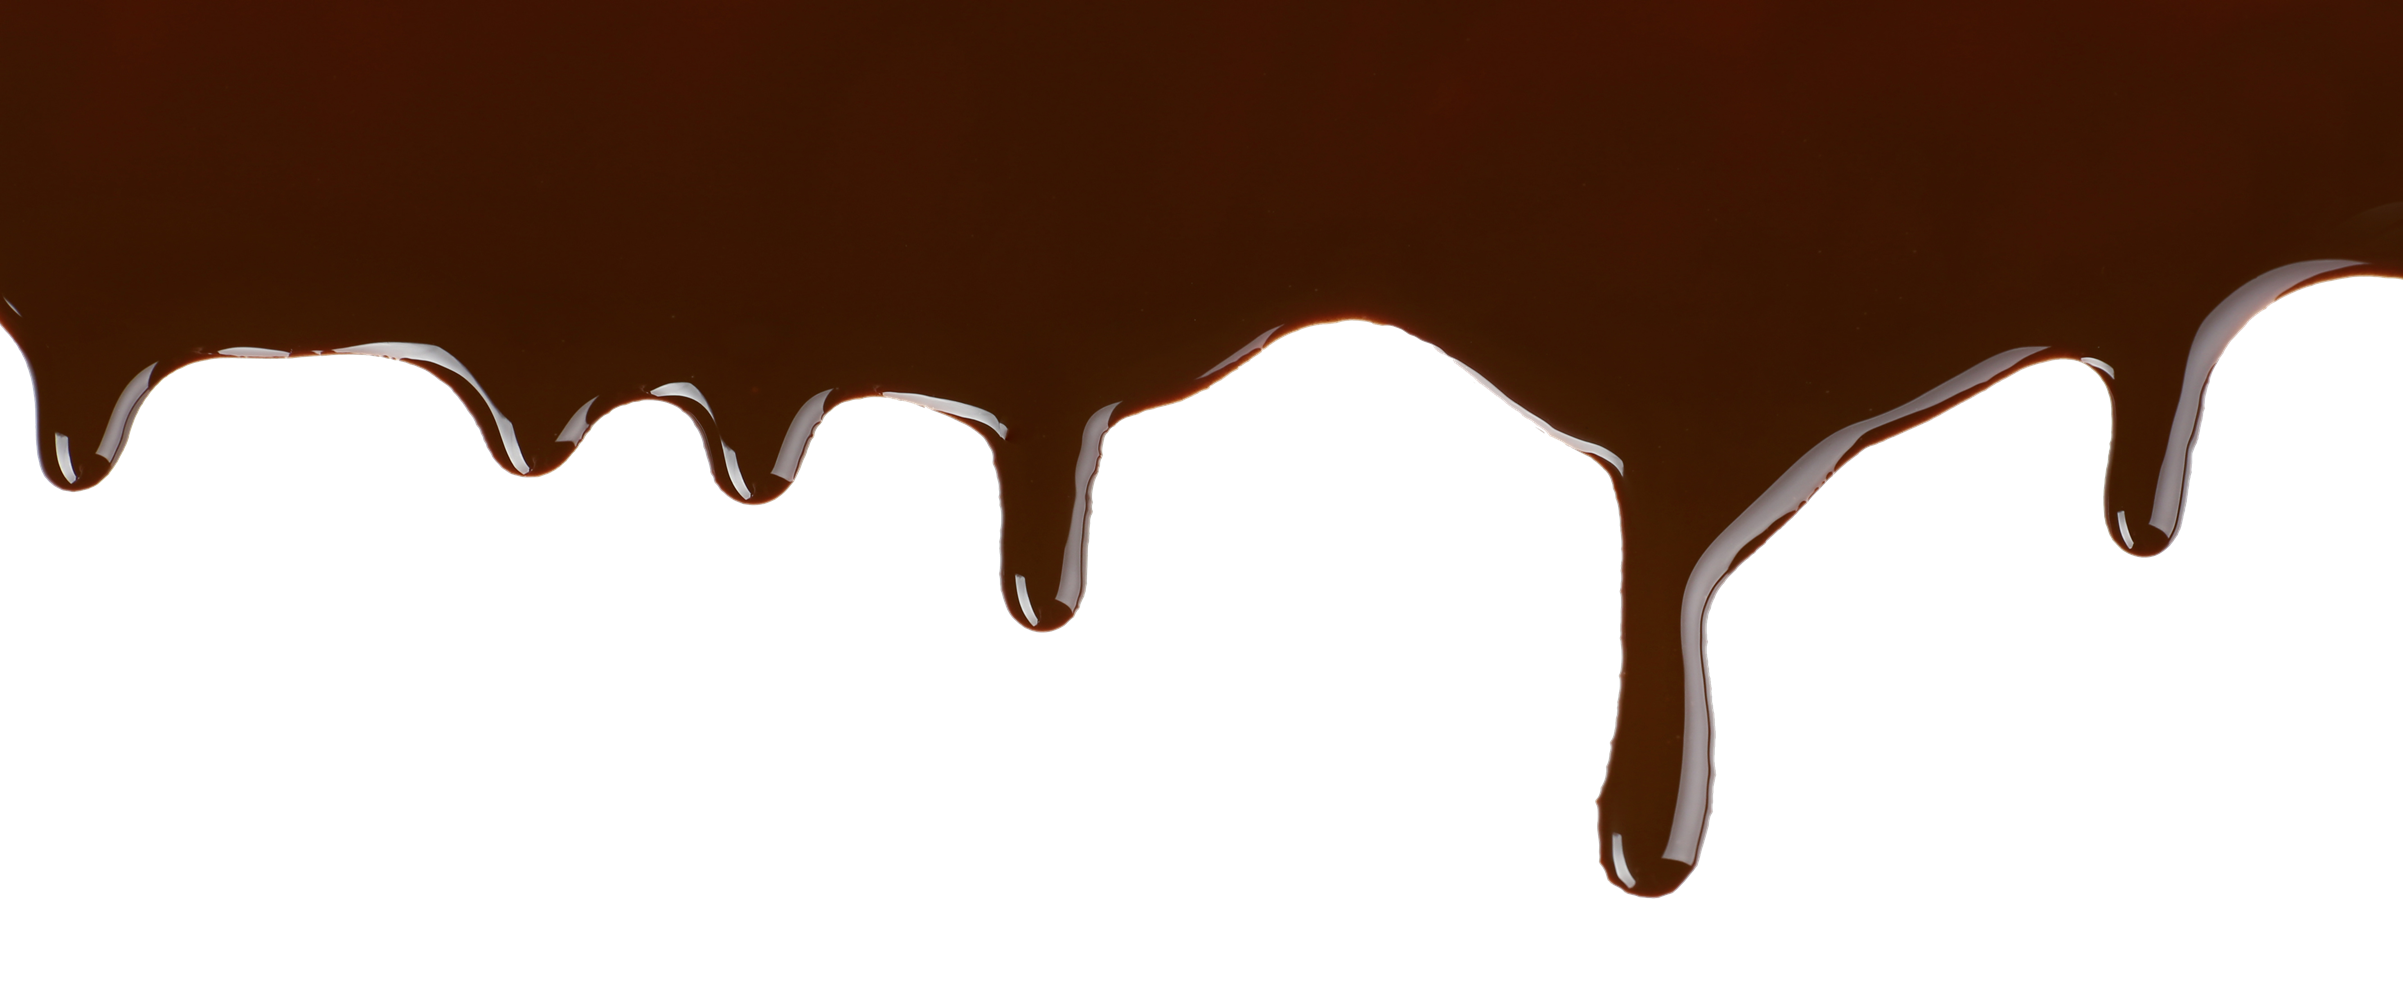 Melted Chocolate Png Image Png Mart